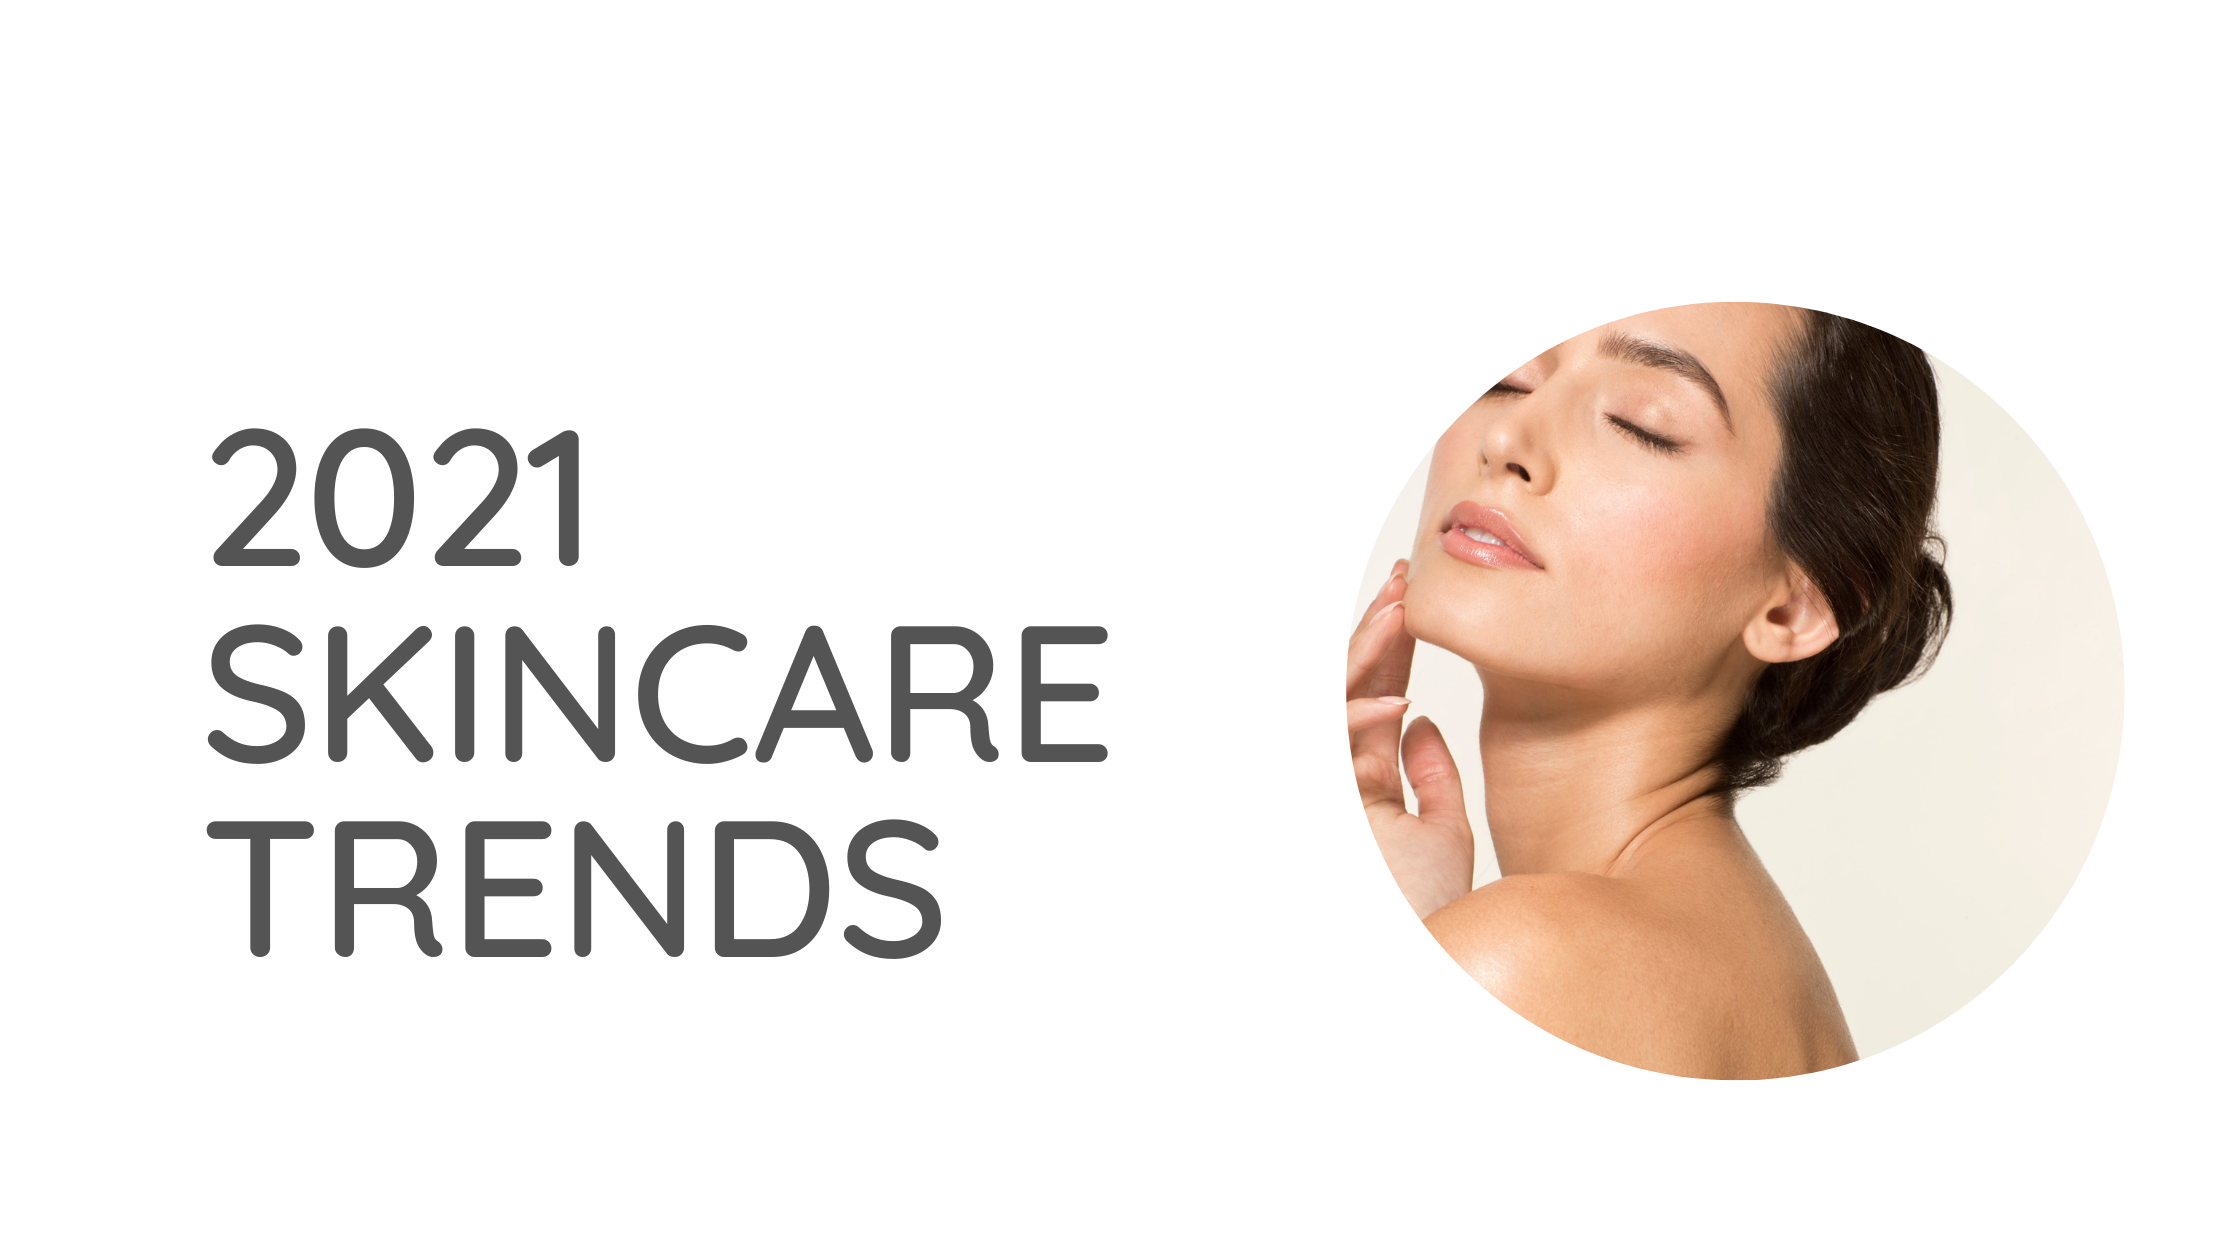 2021 skincare trends to watch out for! 